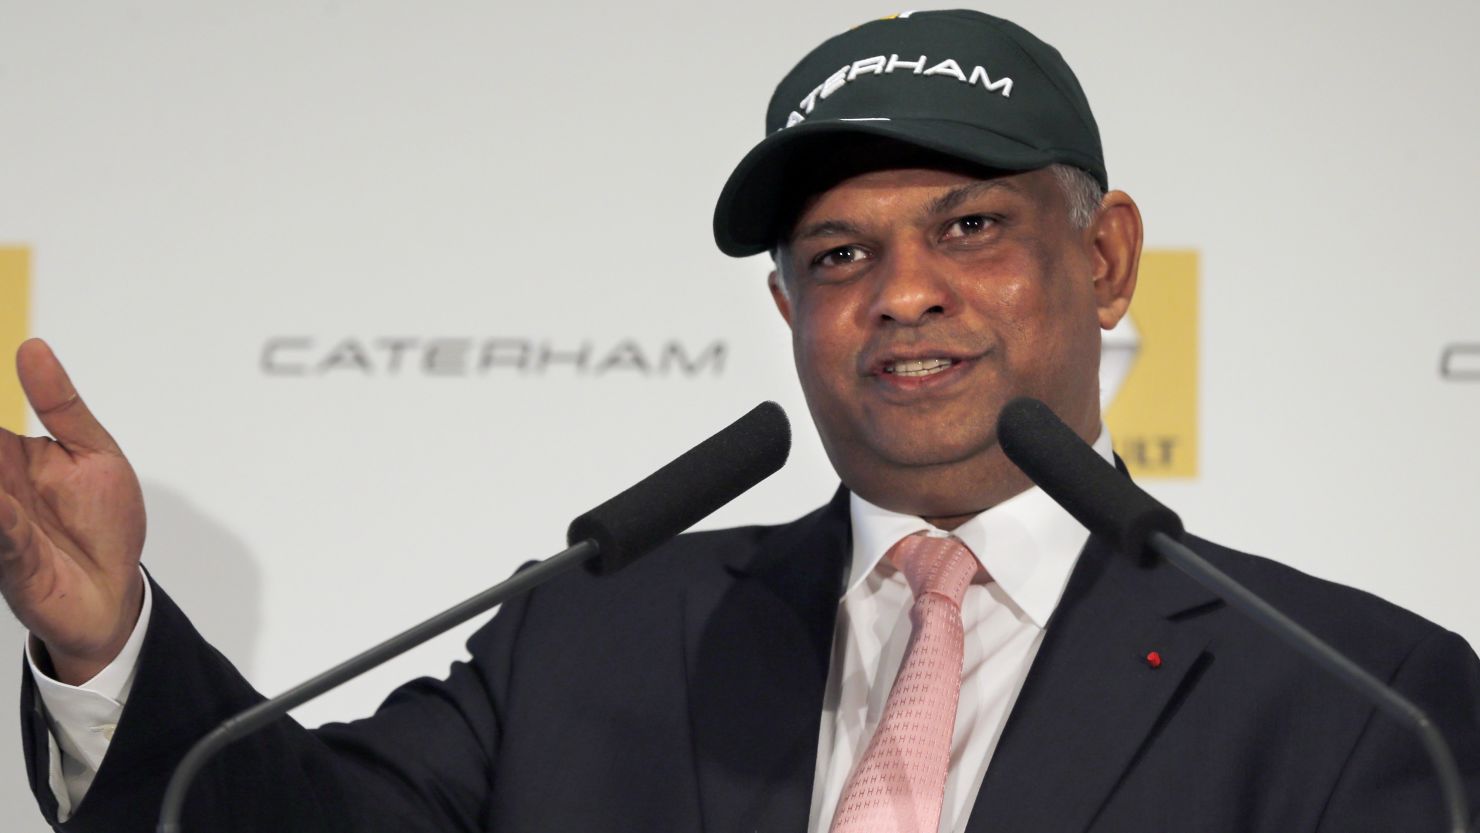 Tony Fernandes founded the British-based Caterham F1 team in 2010.